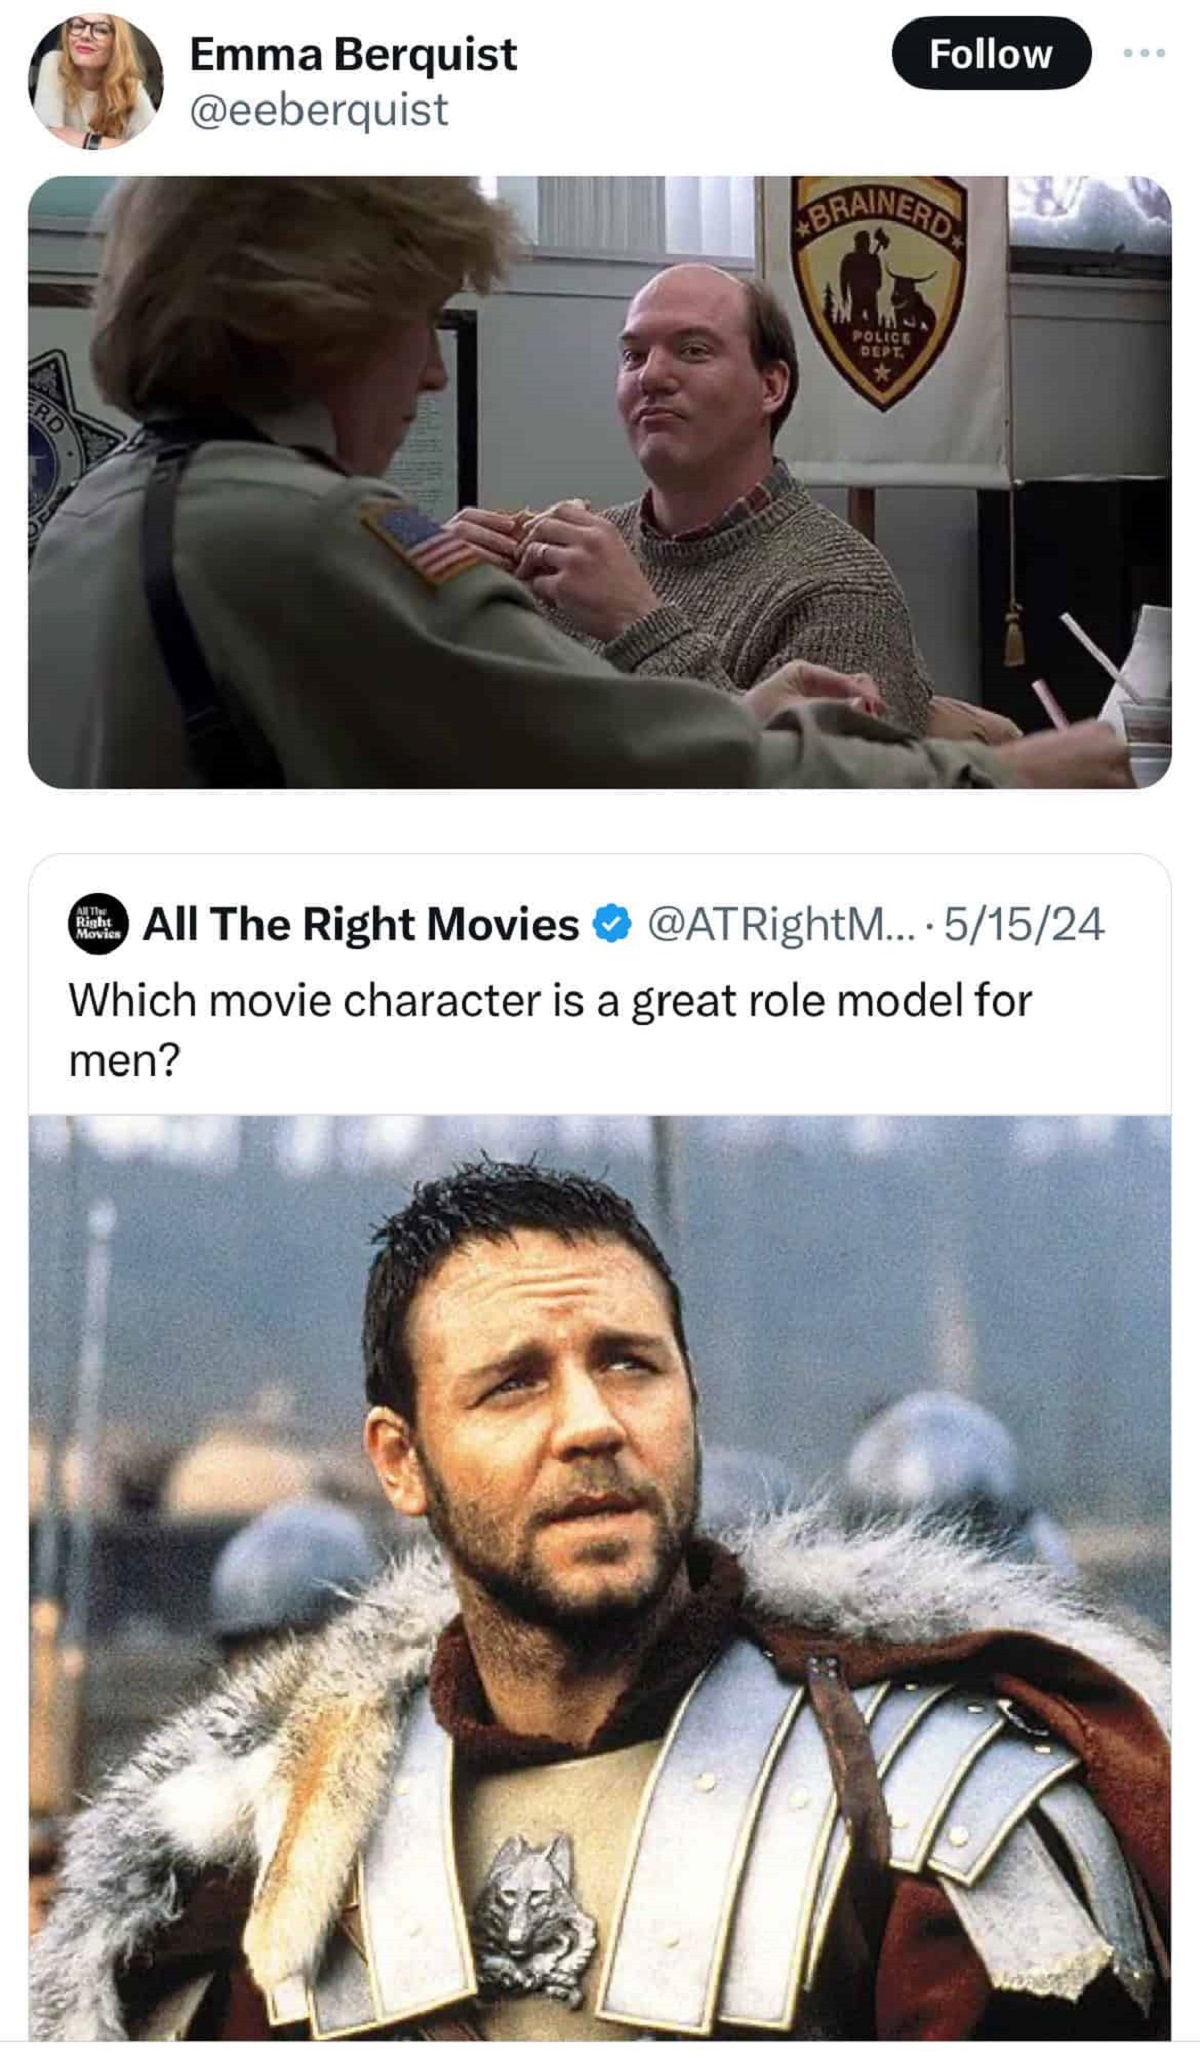 russell crowe gladiator - Emma Berquist All The Right Movies .... 51524 Which movie character is a great role model for men?